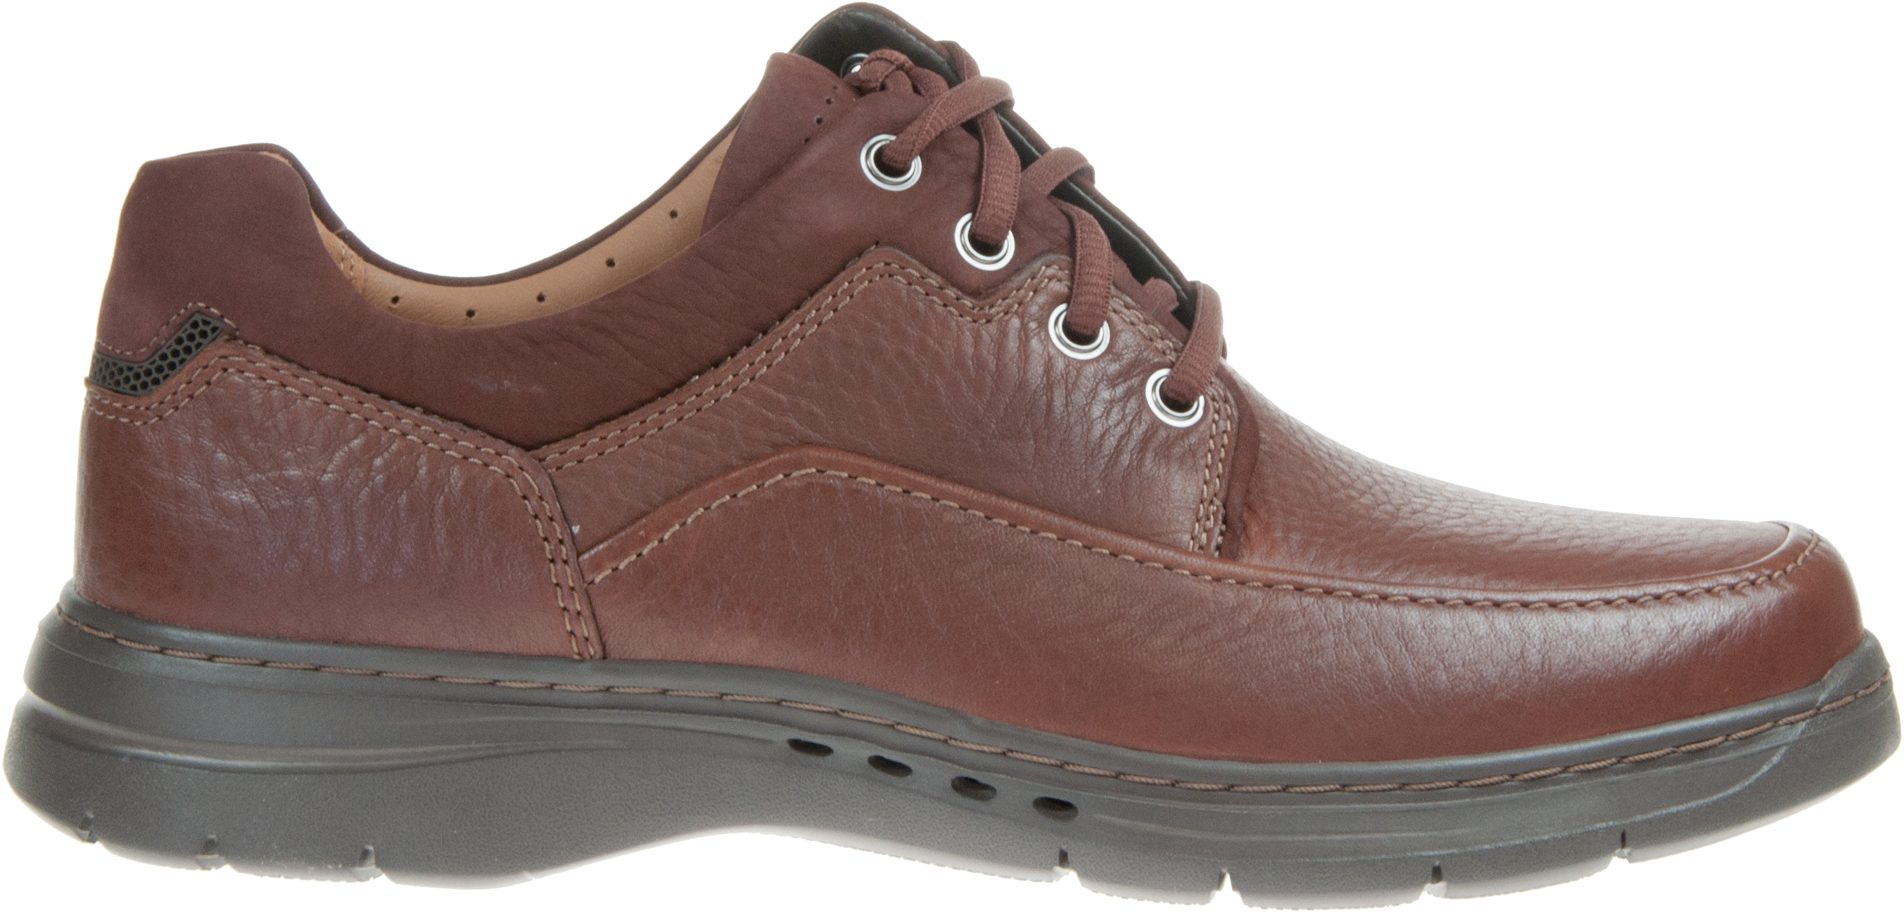 Clarks Un Brawley Lace Mahogany Leather 26151789 - Casual Shoes ...